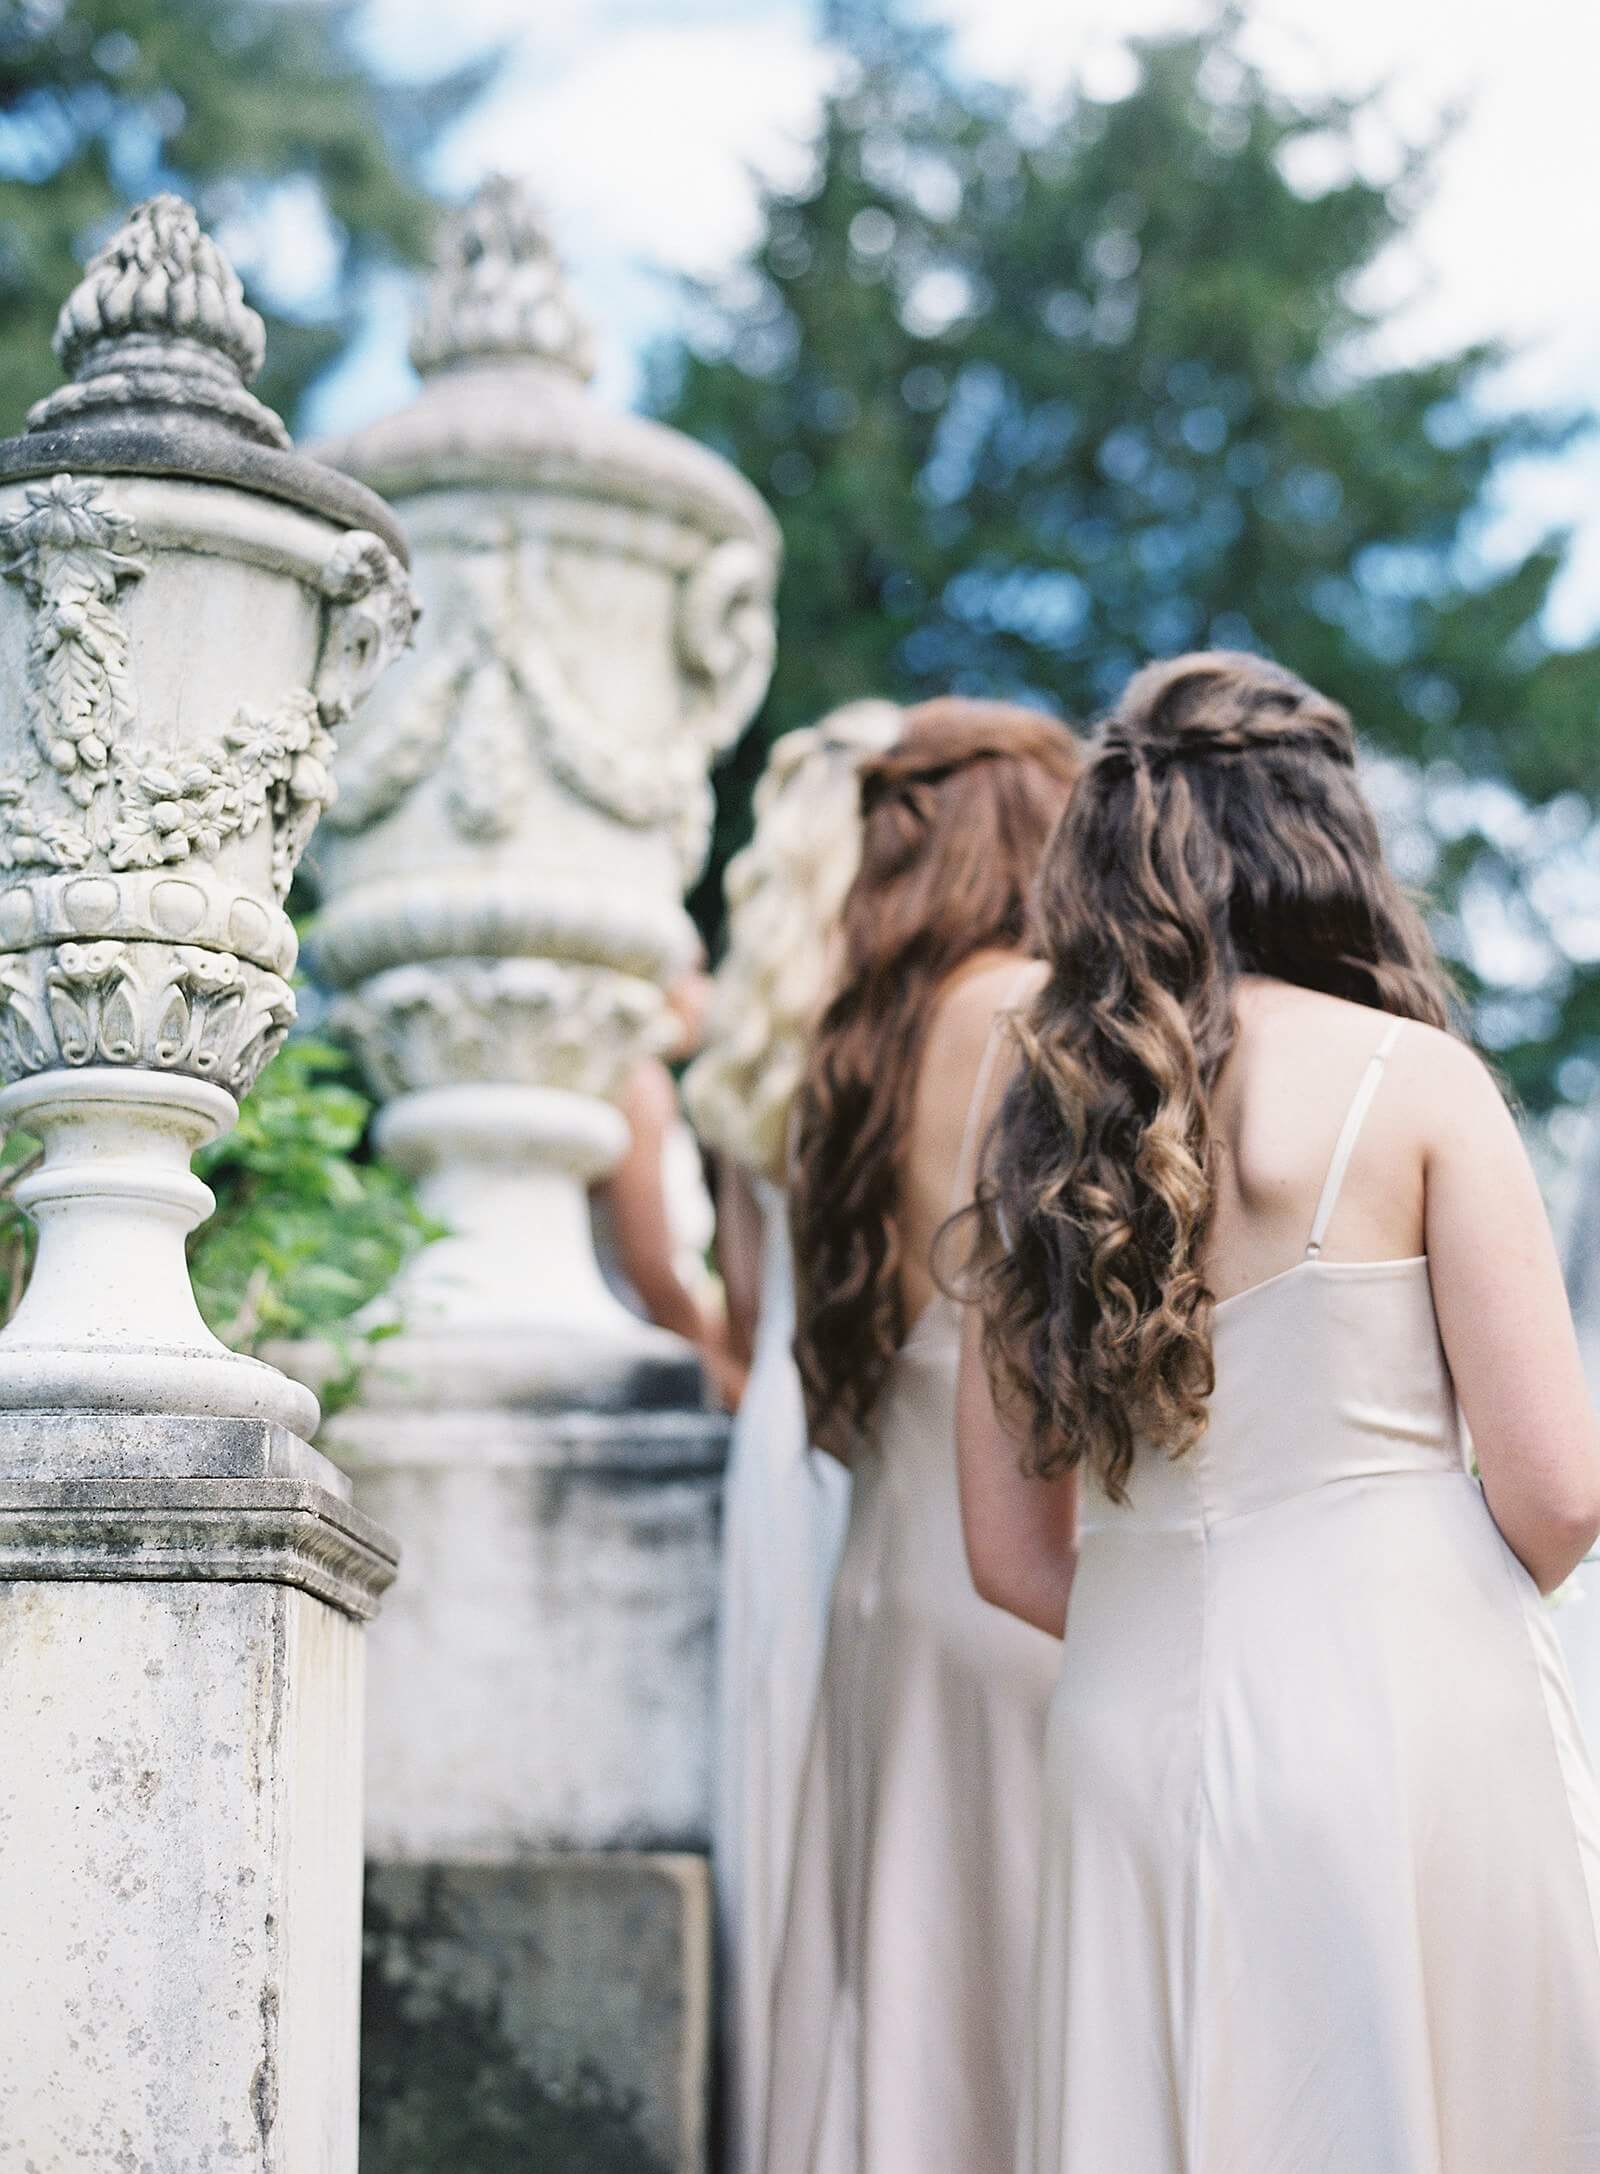 Bridesmaids at the alter at Thornewood Castle wedding ceremony - Jacqueline Benét Photography